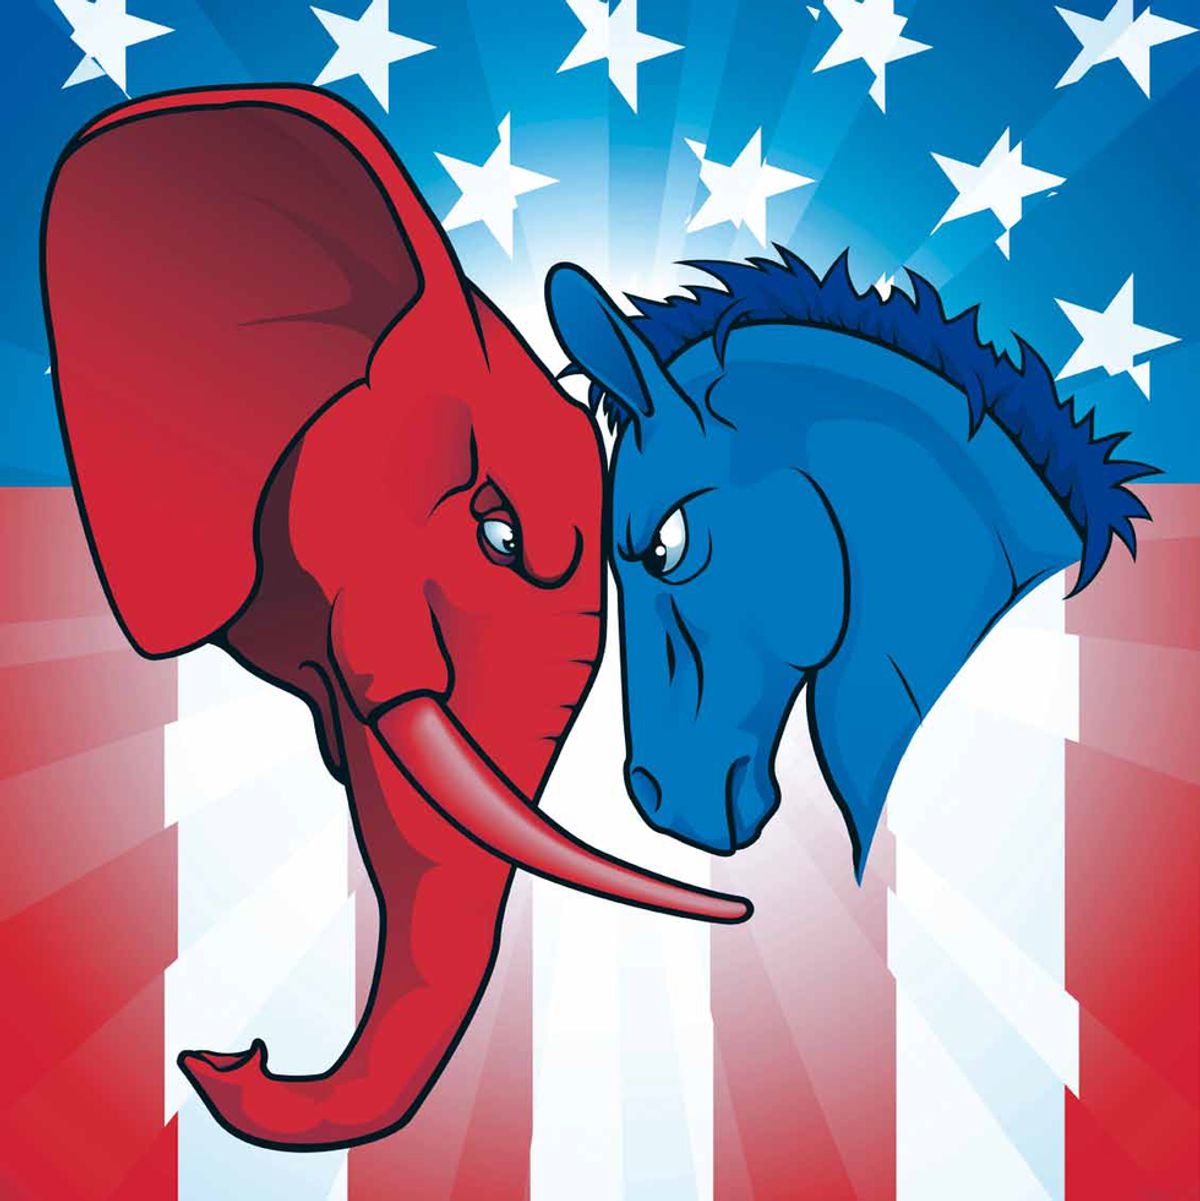 What's With This Two Party System?